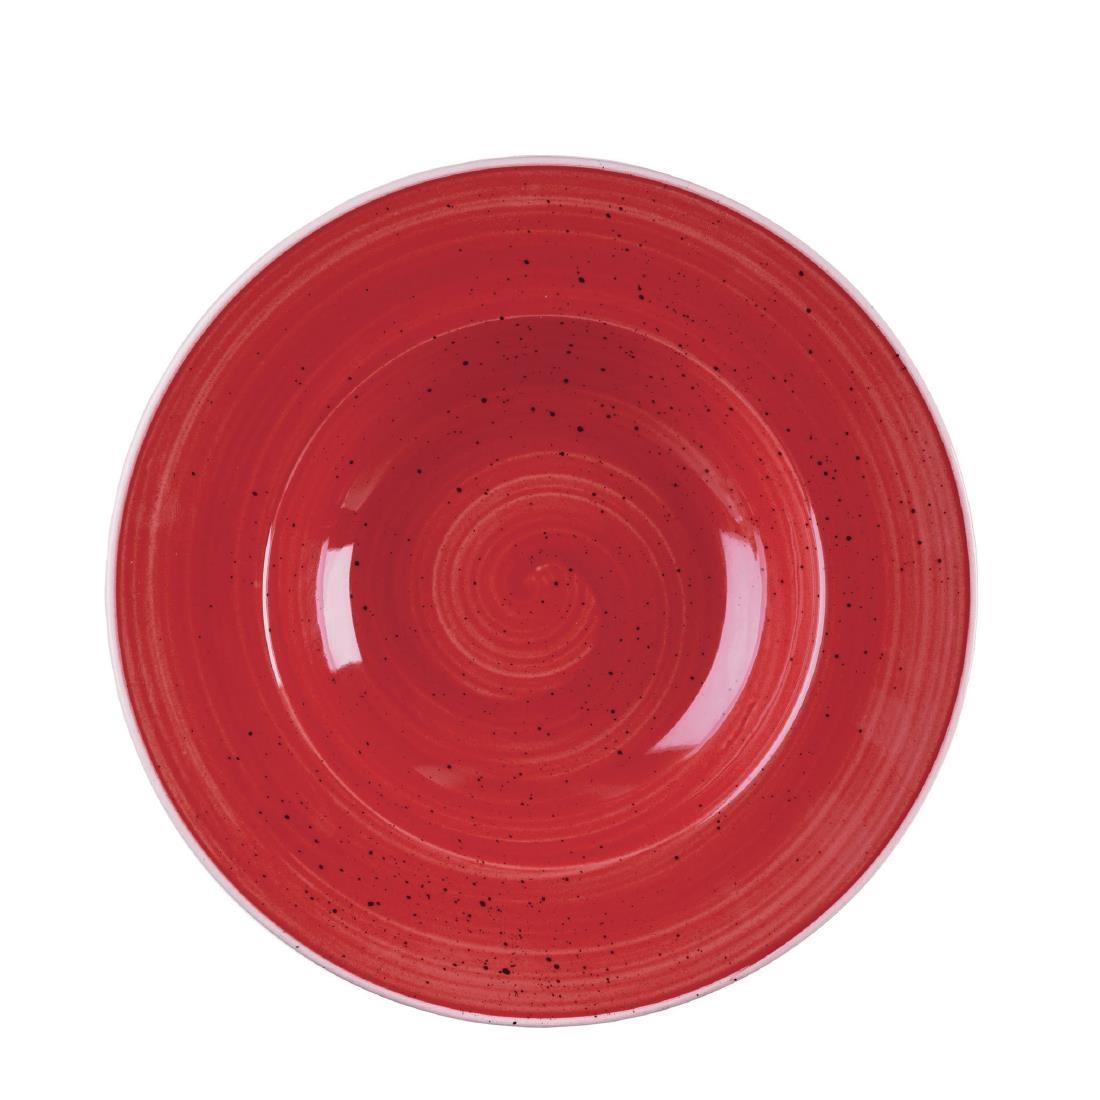 Churchill Stonecast Round Wide Rim Bowl Berry Red 240mm (Pack of 12) - DM467  - 1